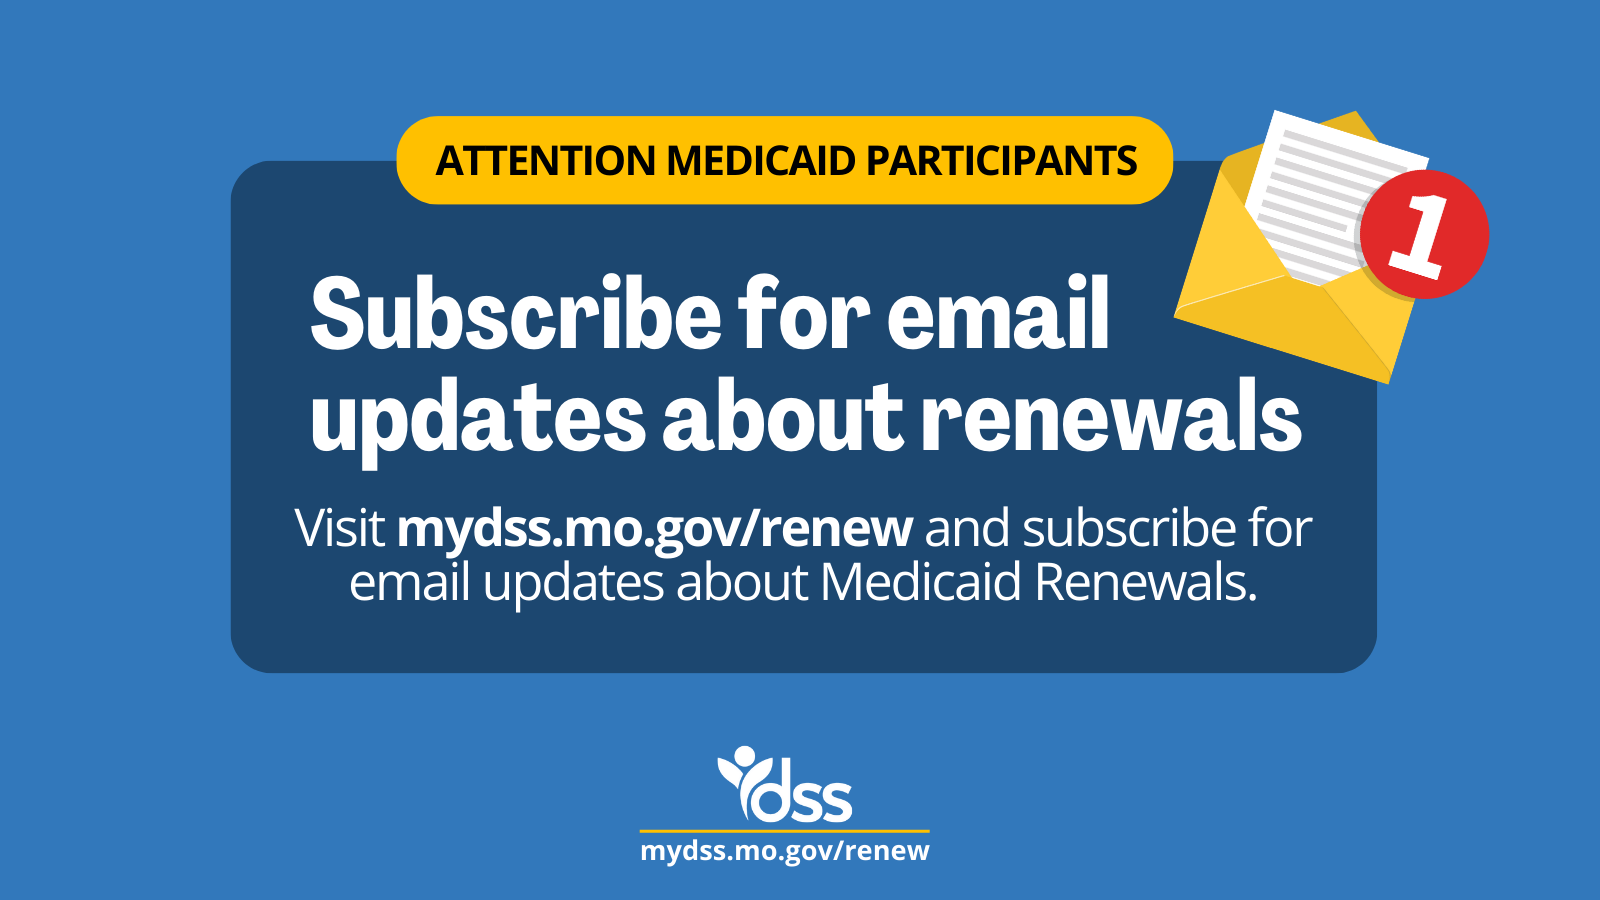 Subscribe for email updates about renewals